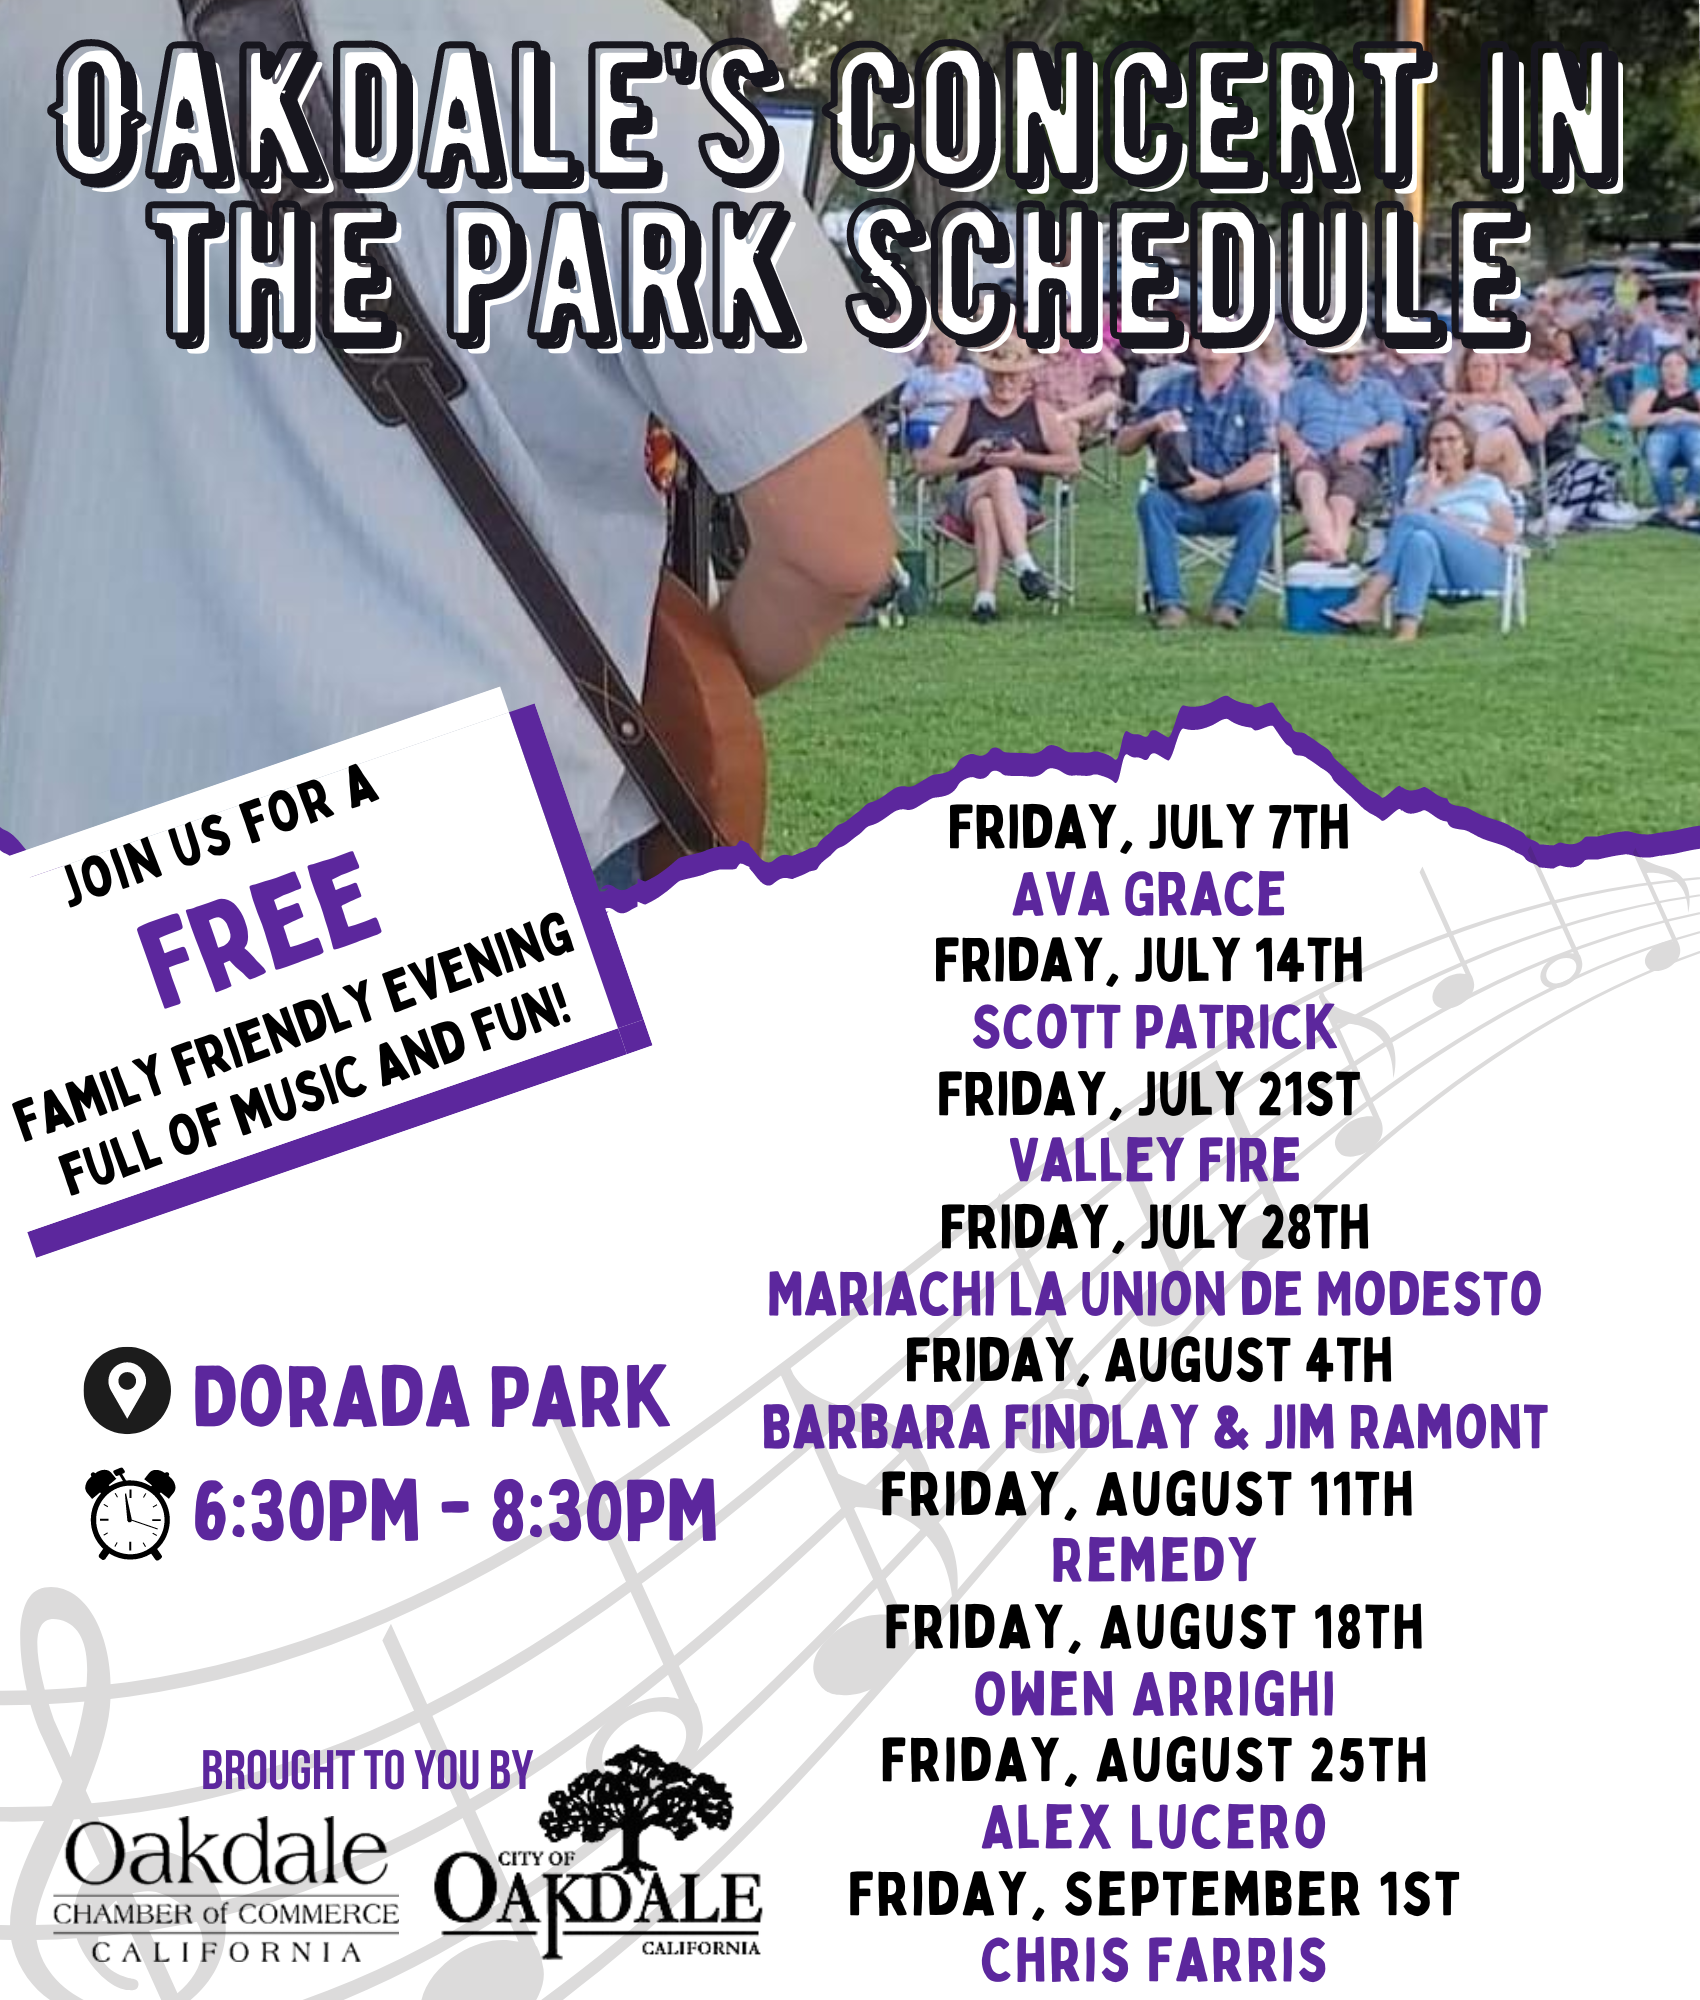 Concerts in the Park Oakdale Events Calendar